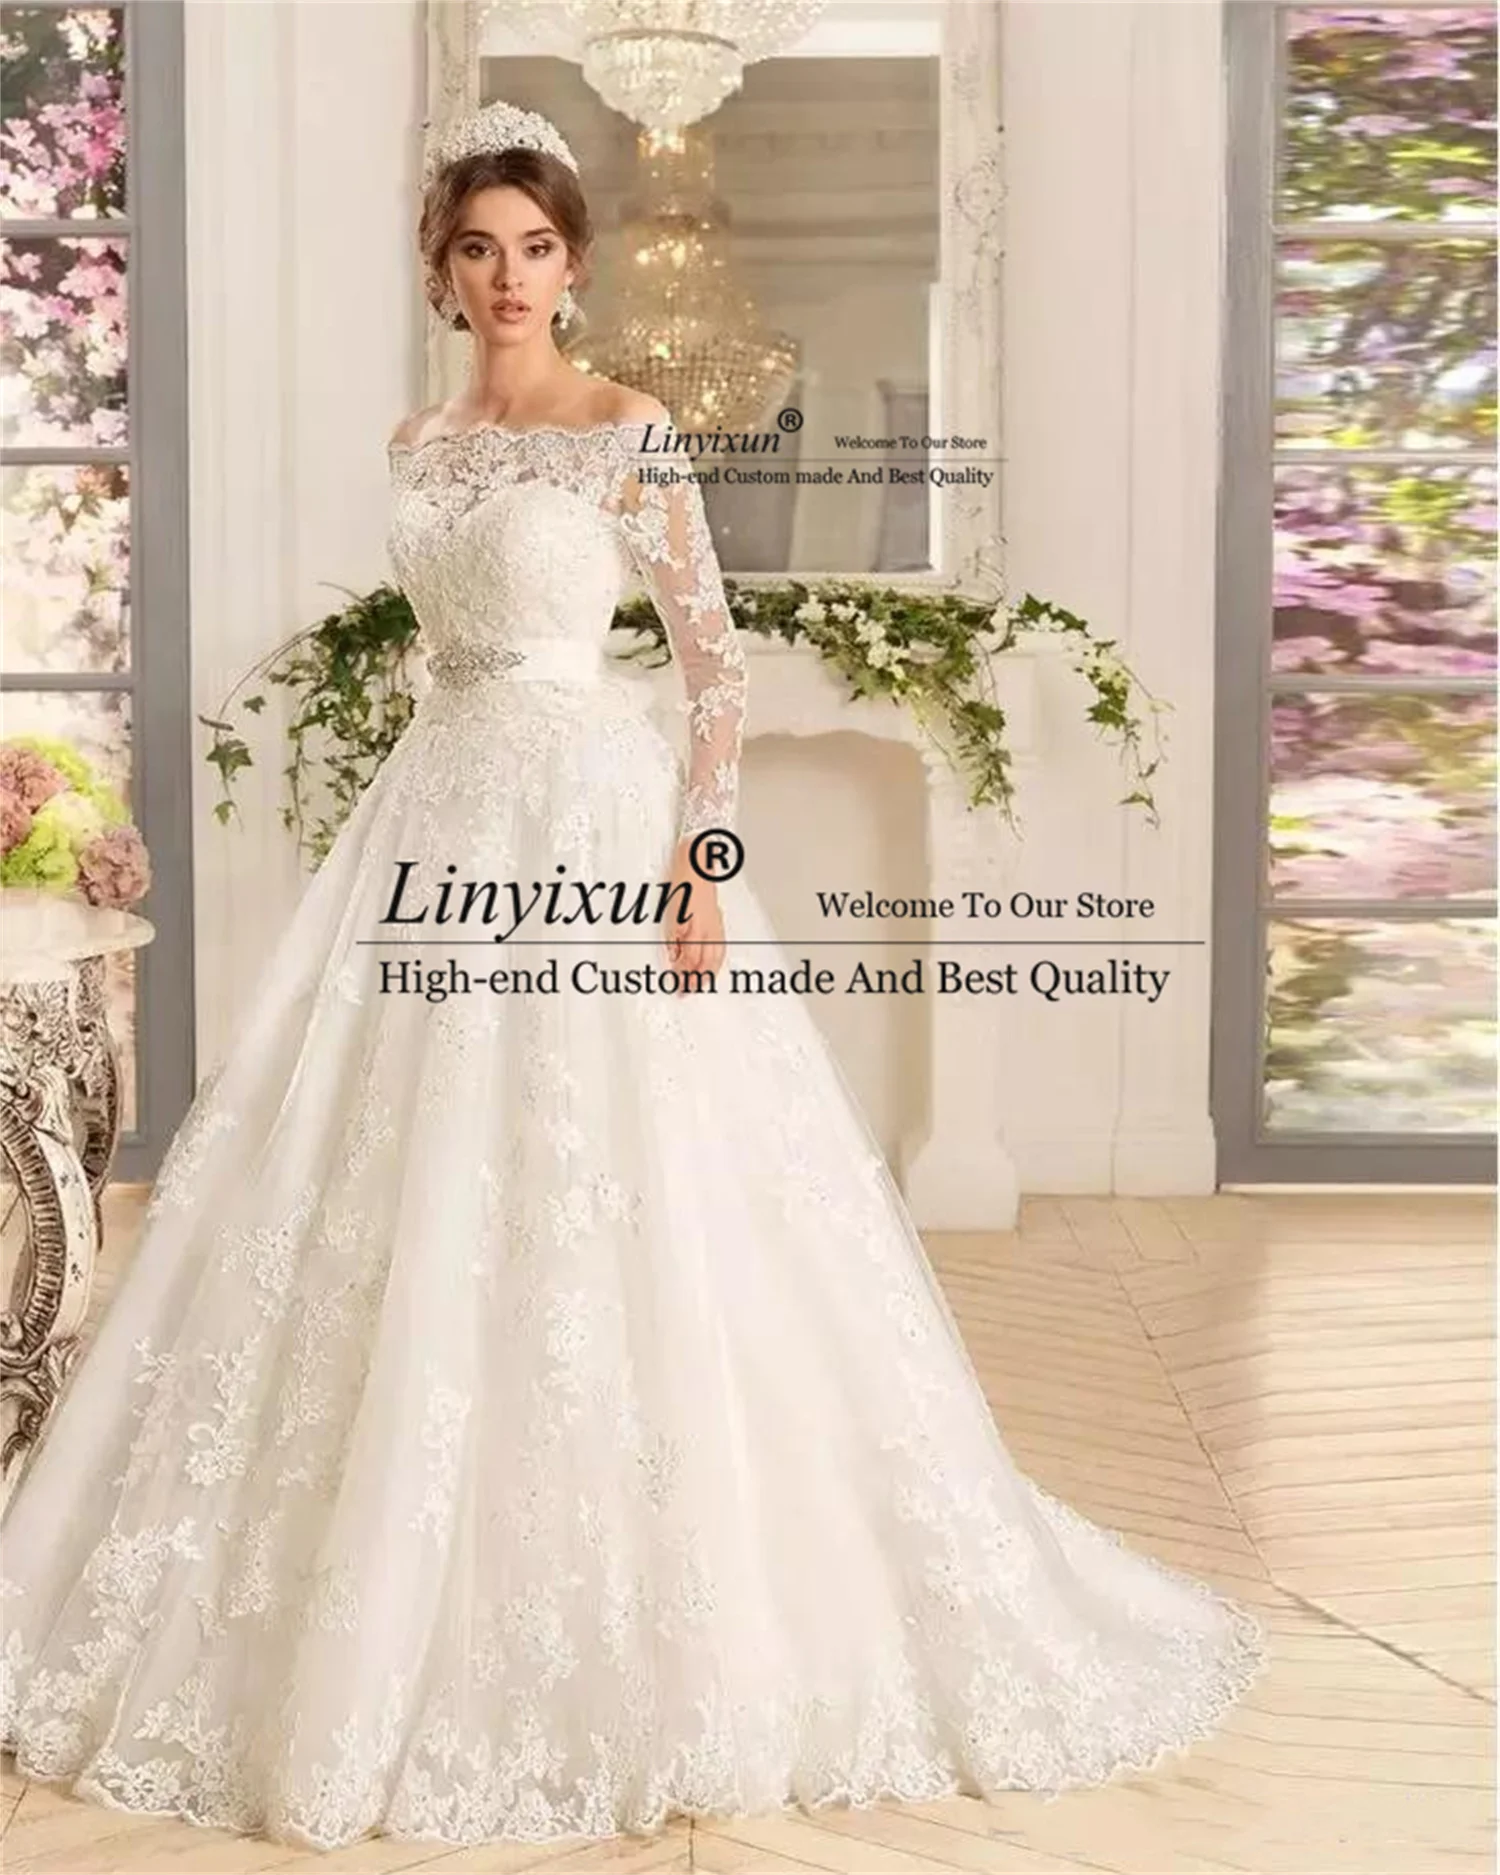 

Elegant Long Sleeves A Line Wedding Dresses 2022 Lace Appliques Bridal Gowns With Beads Sash Sweep Train Tulle Vestidos de noiva